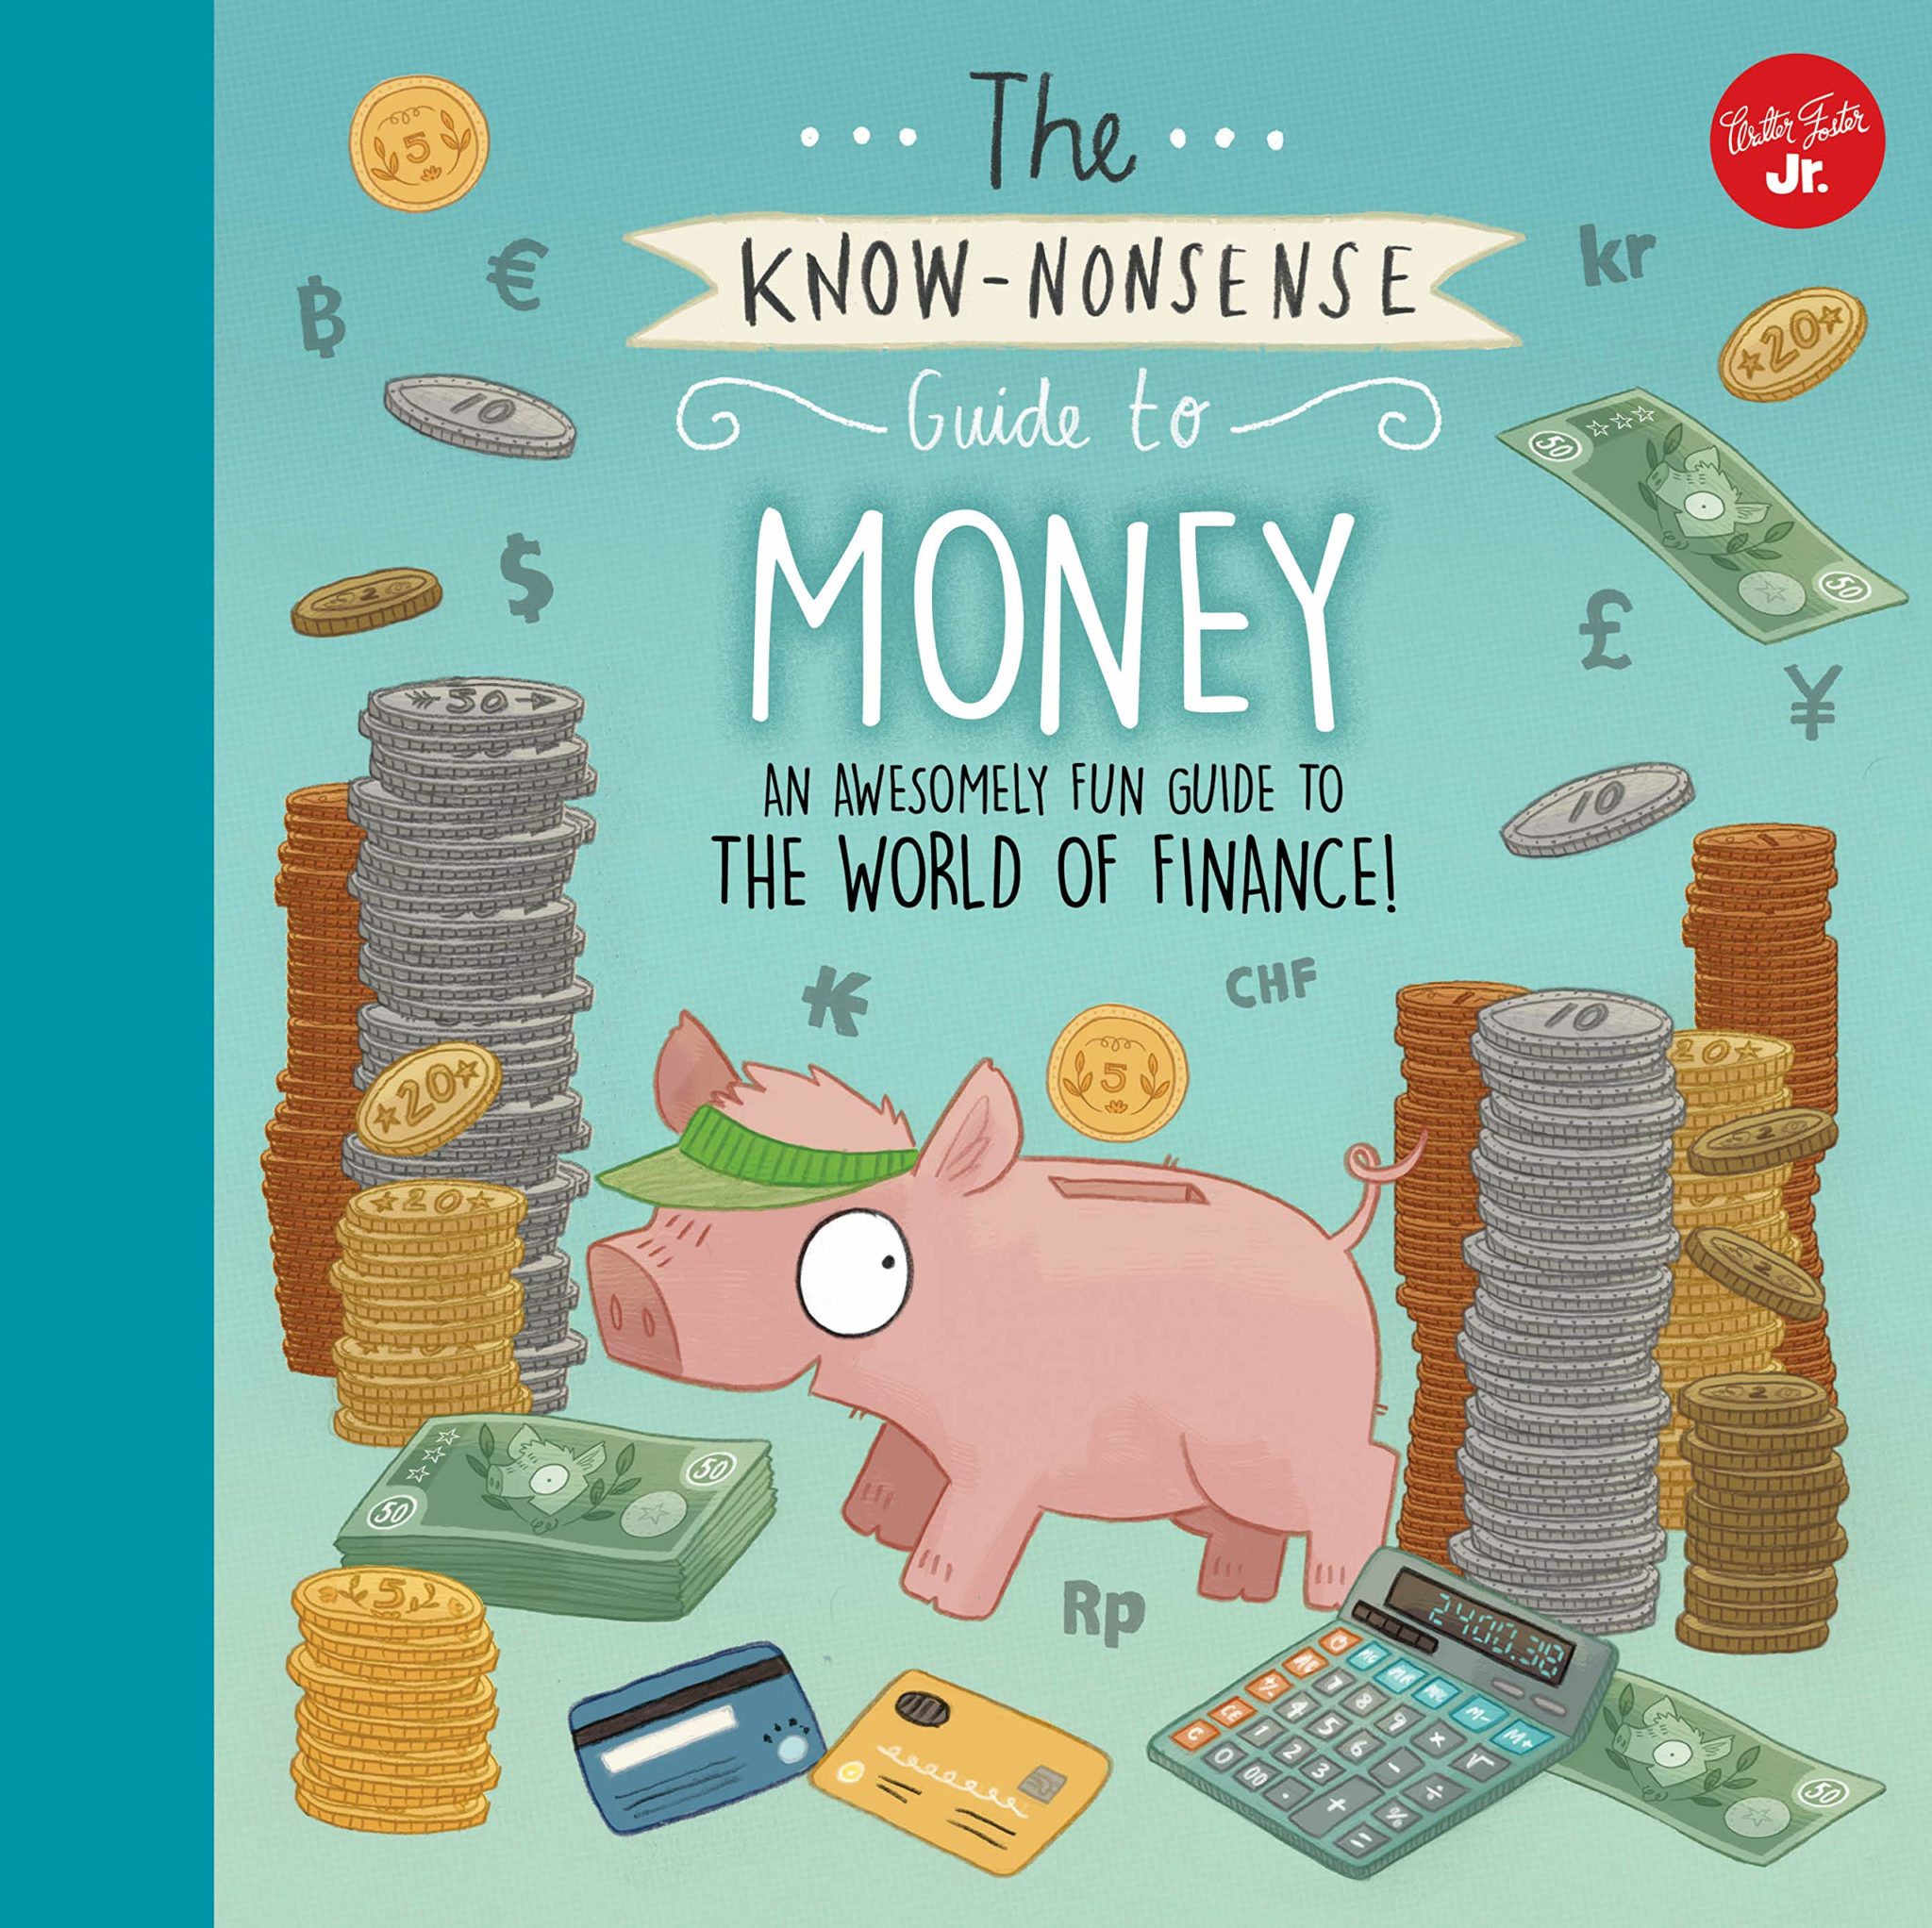 The cover of the children's book "The Know-Nonsense Guide to Money" features a smiling cartoon piggy bank surrounded by piles of coins, stacks of bills, credit cards, and a calculator. Coins and money symbols rain from the sky, and a coin falls into the hole in the piggy bank. 